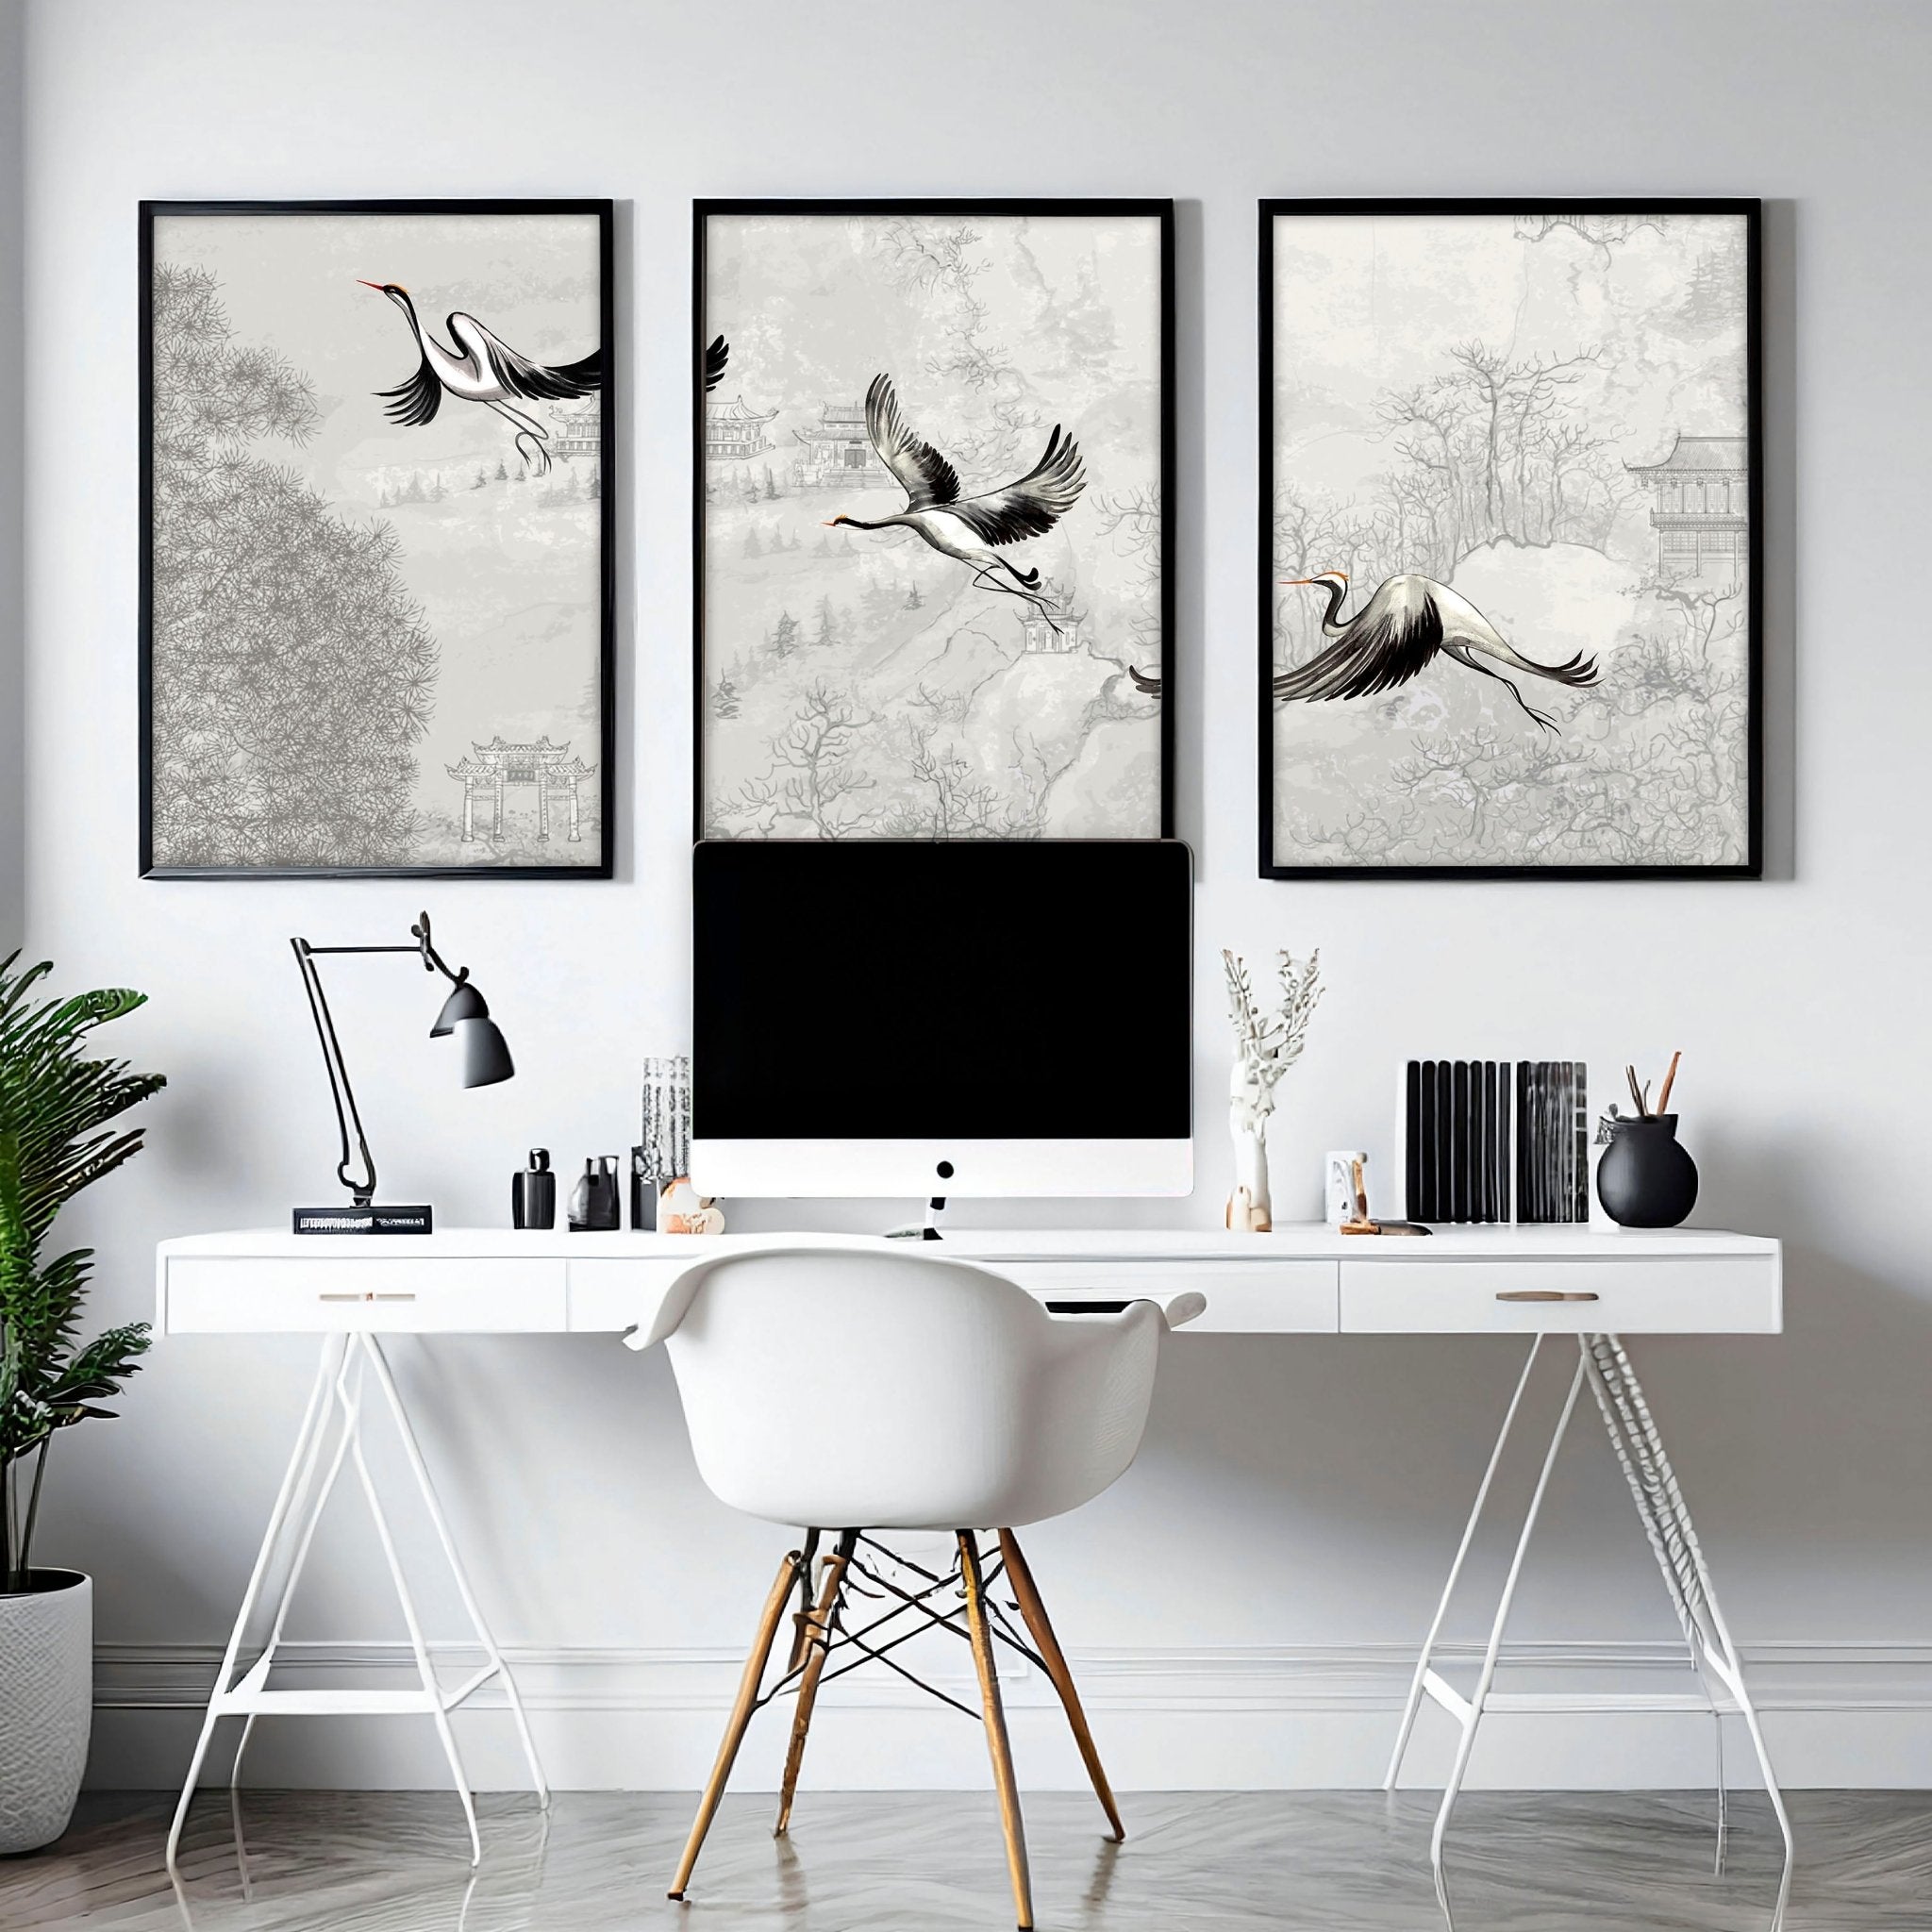 Pictures for office walls | set of 3 wall art prints